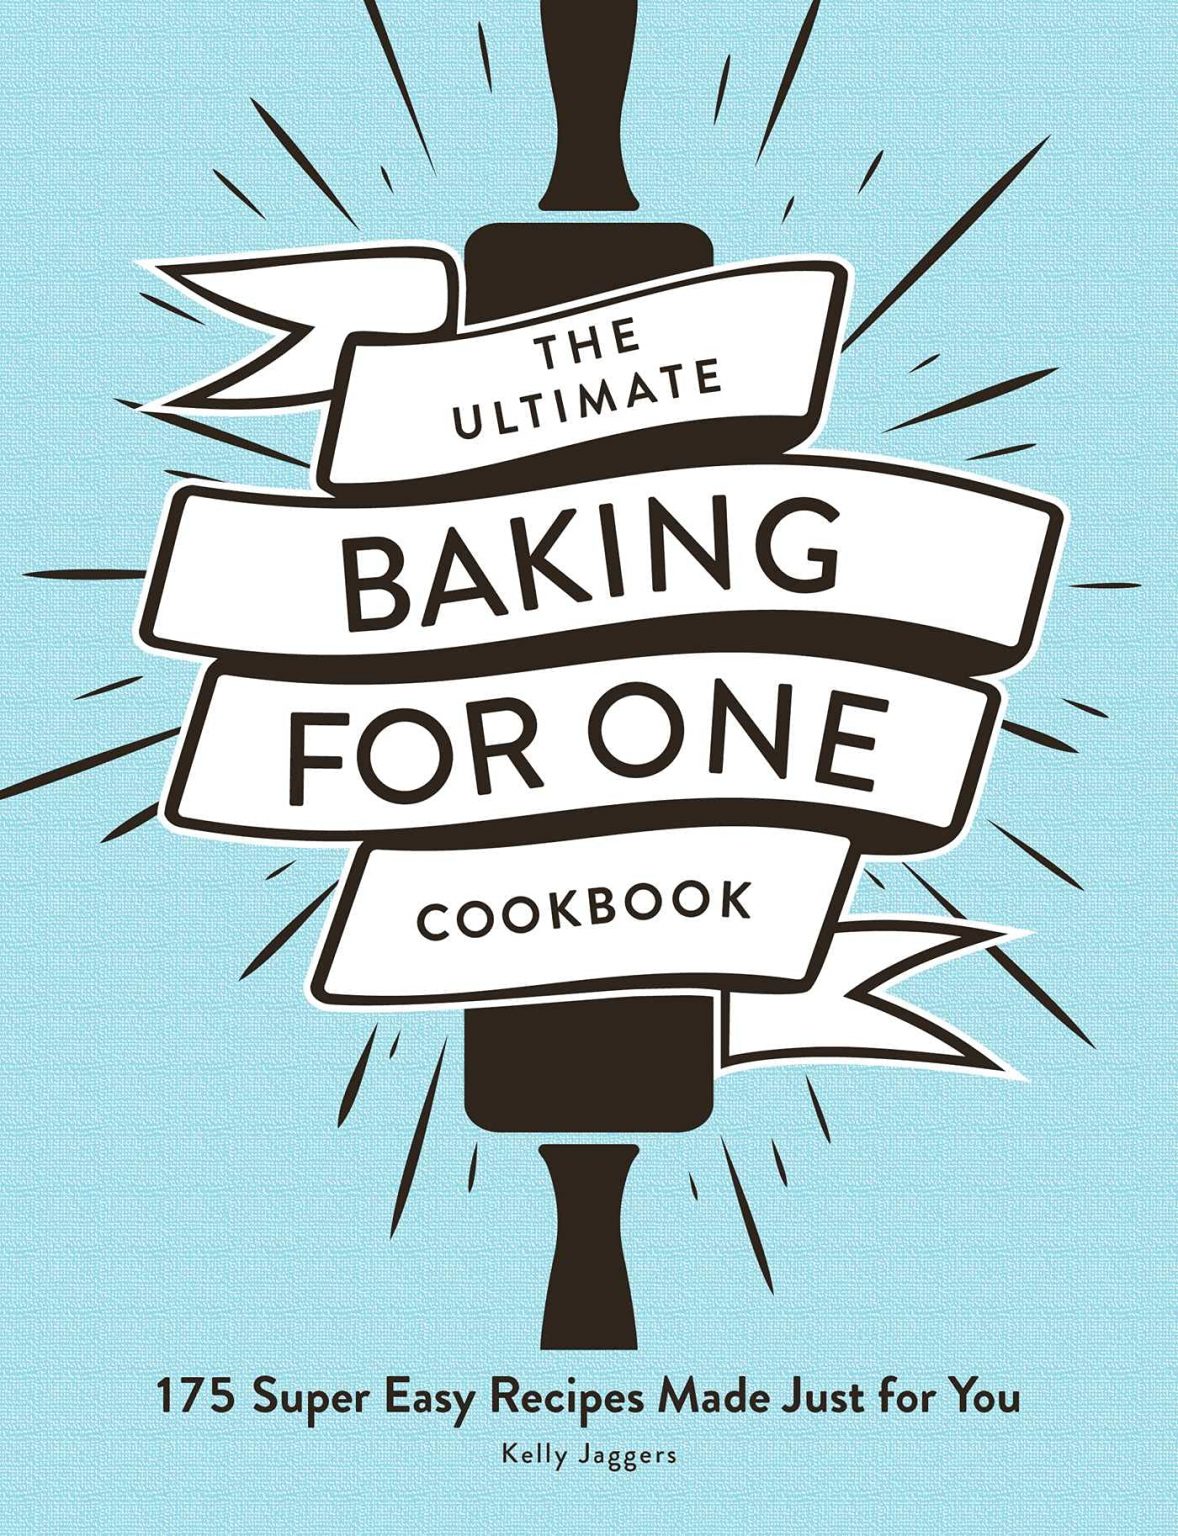 The Ultimate Baking for One Cookbook: 175 Super Easy Recipes Made Just for You.